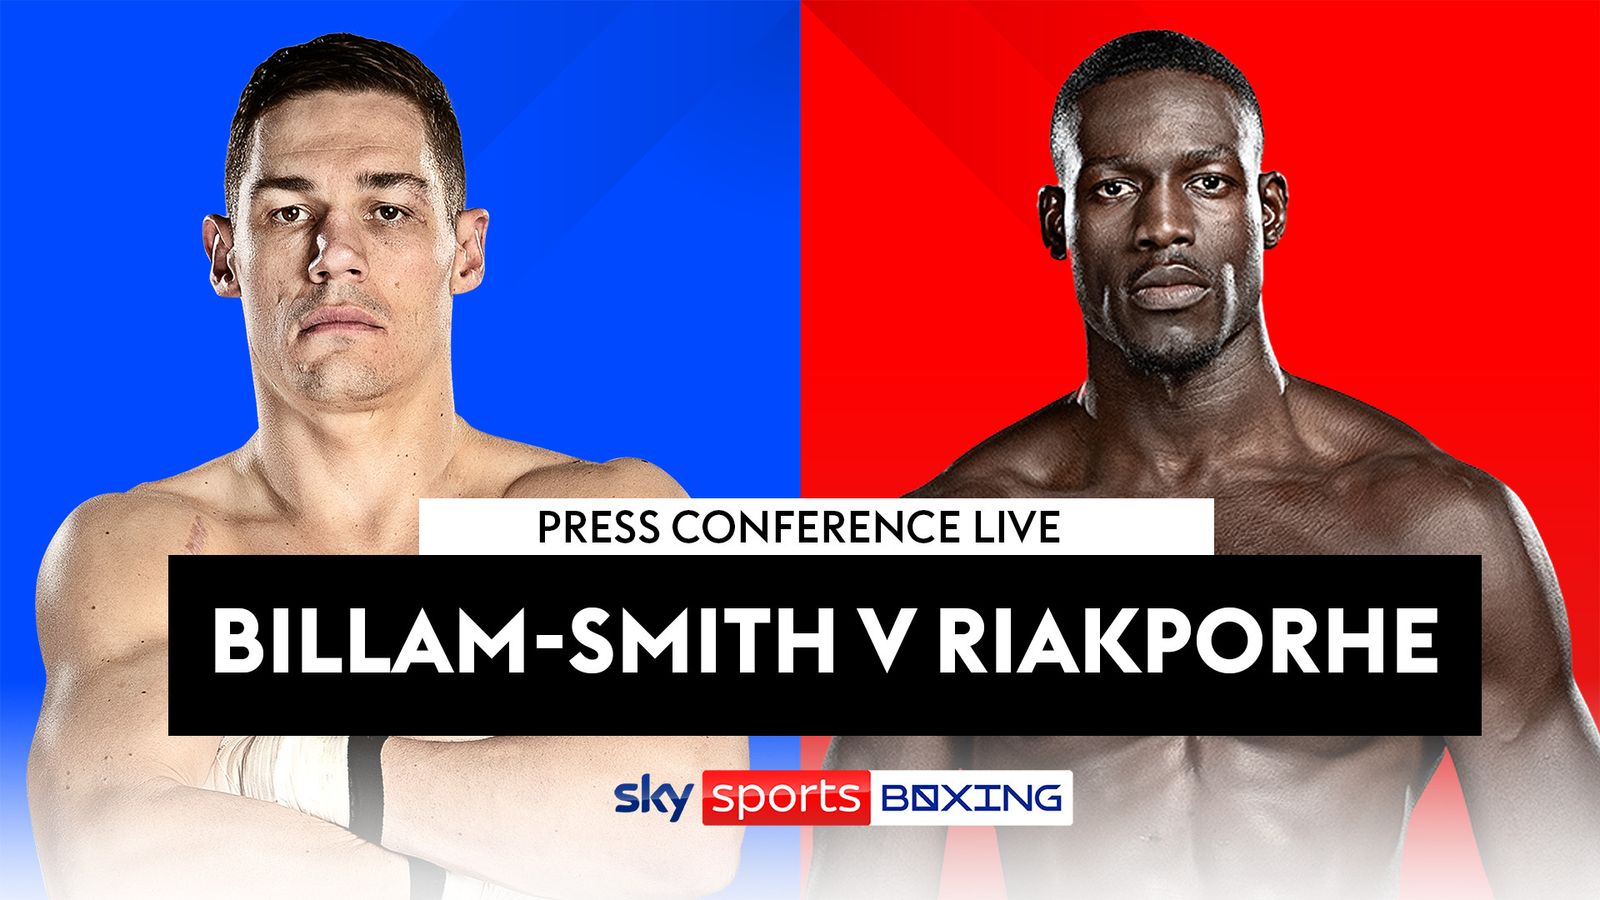 FREE STREAM: Watch Chris Billam-Smith and Richard Riakporhe at the final press conference ahead of world title fight | Boxing News